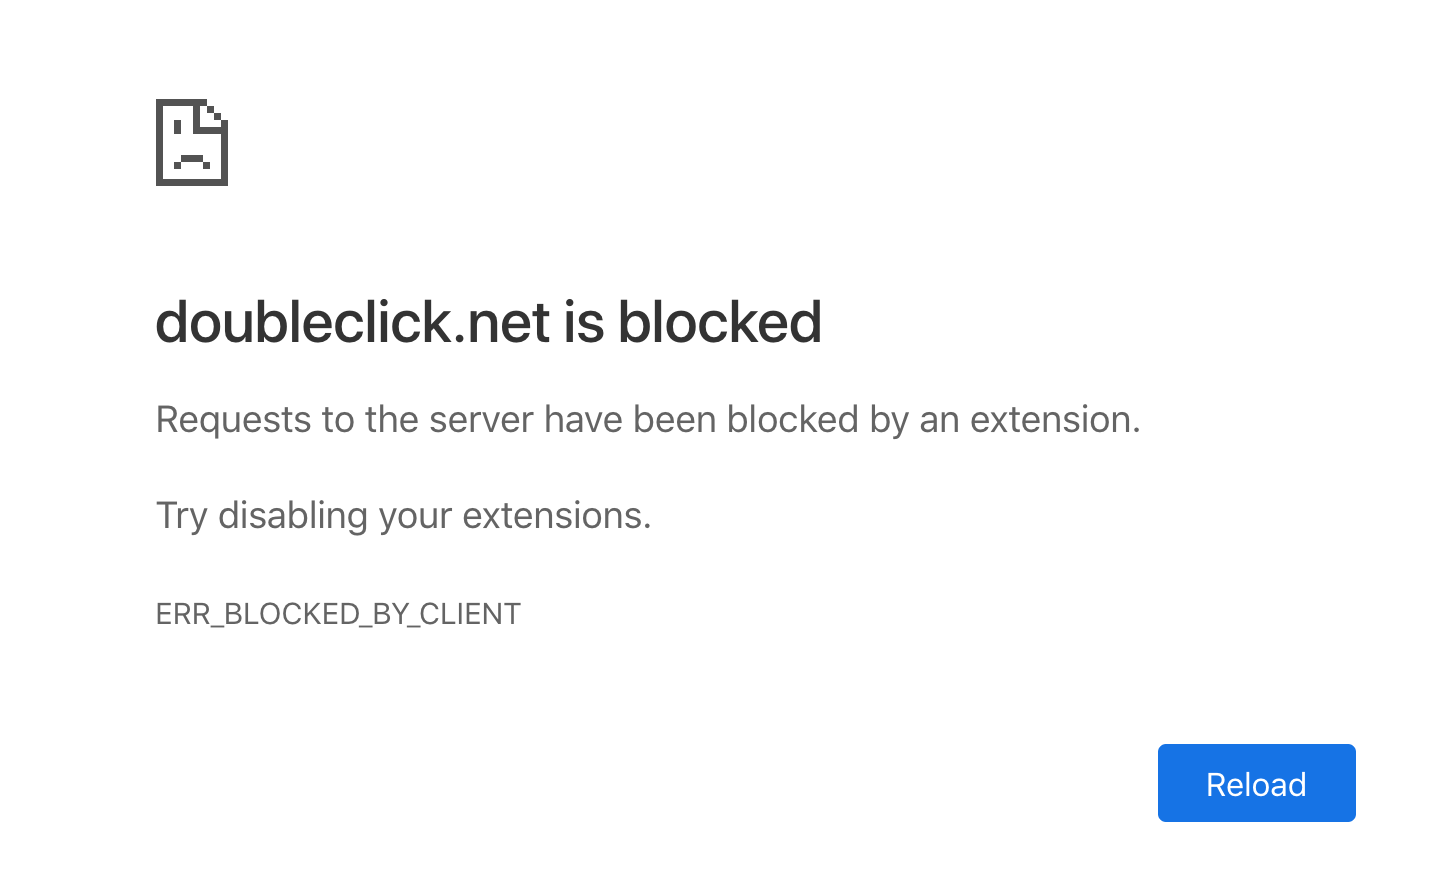 Requests to the server have been blocked by an extension error in Chrome or Microsoft Edge